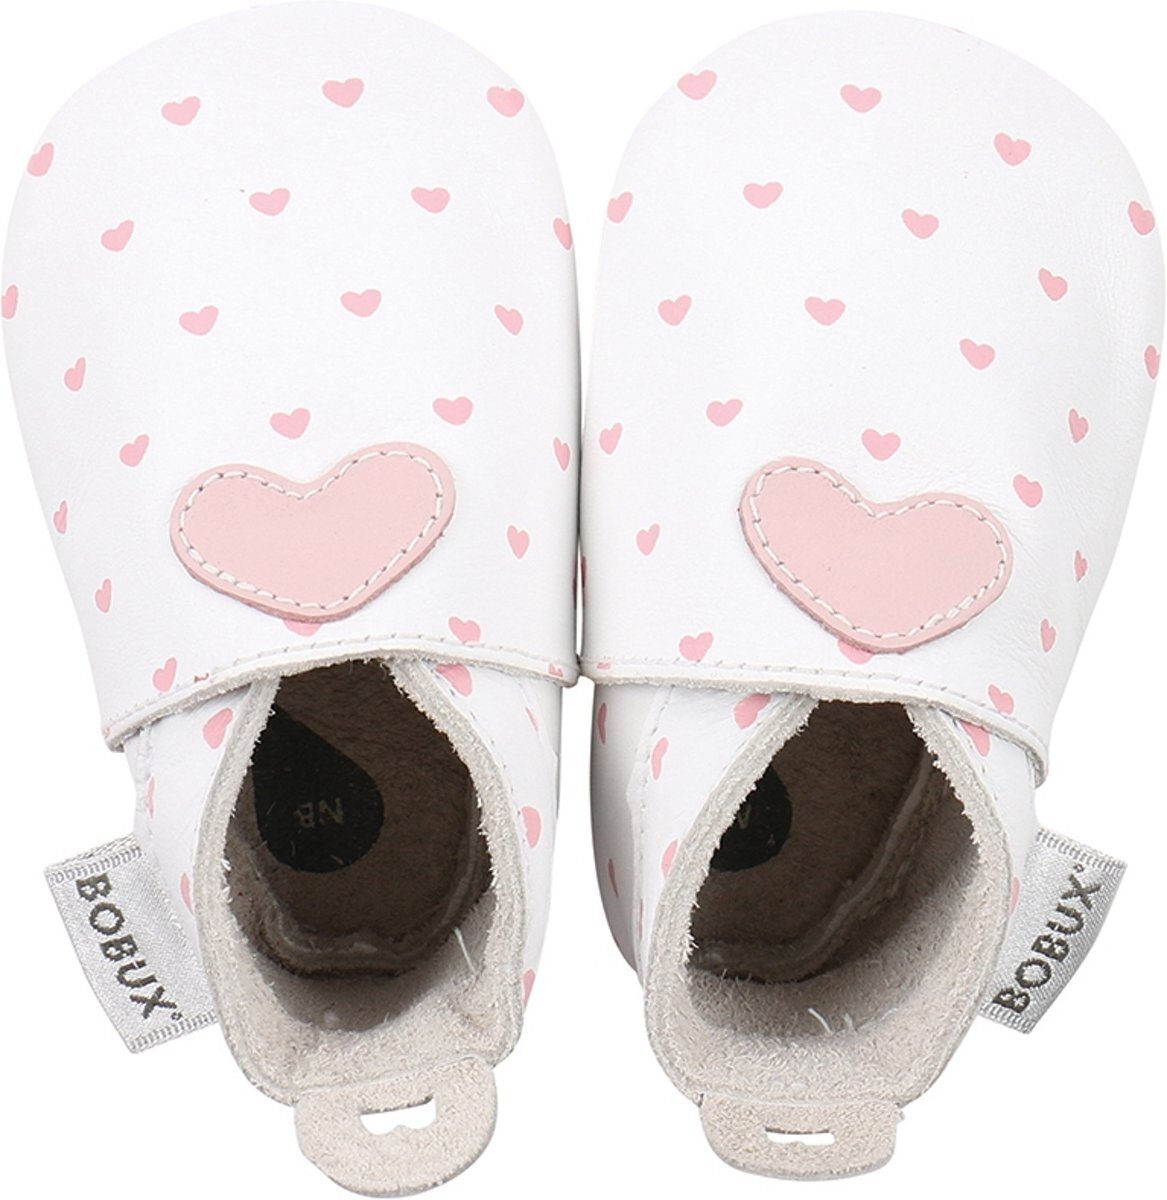 Bobux babyslofjes white with blossom hearts print - maat 16